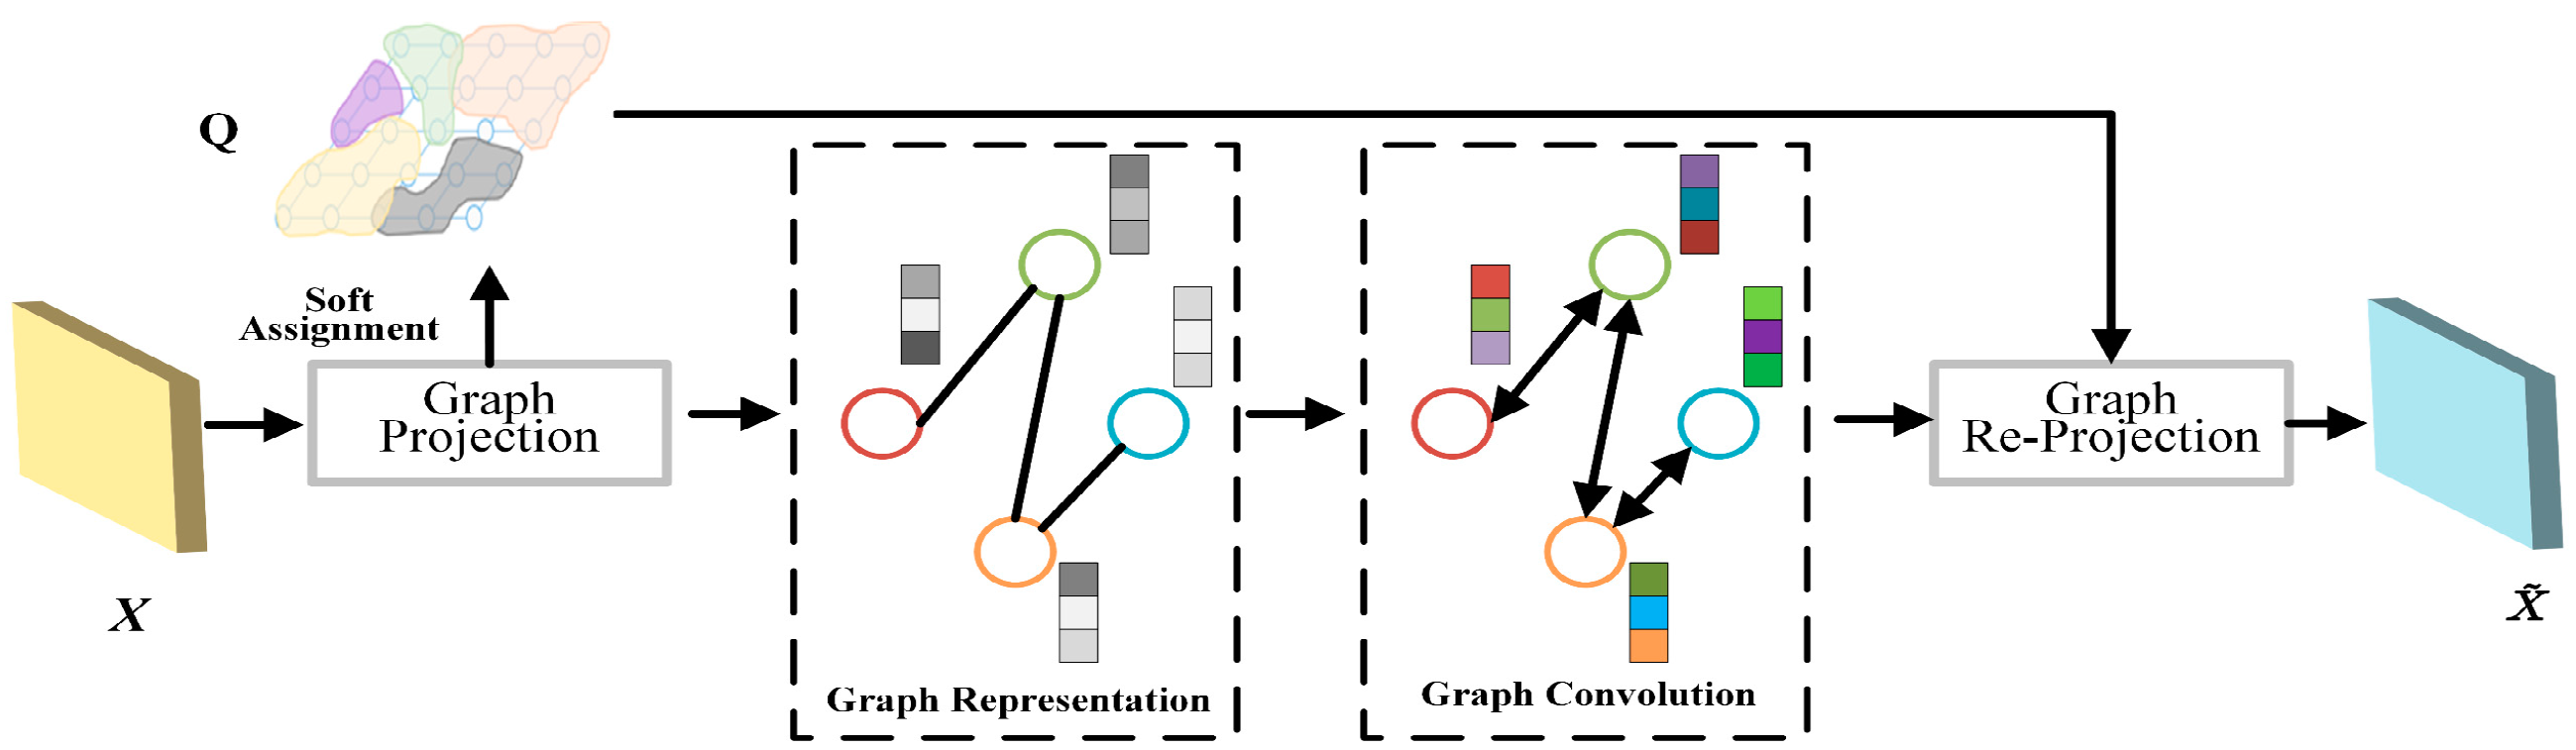 Dragon: A distributed graph query engine - Engineering at Meta